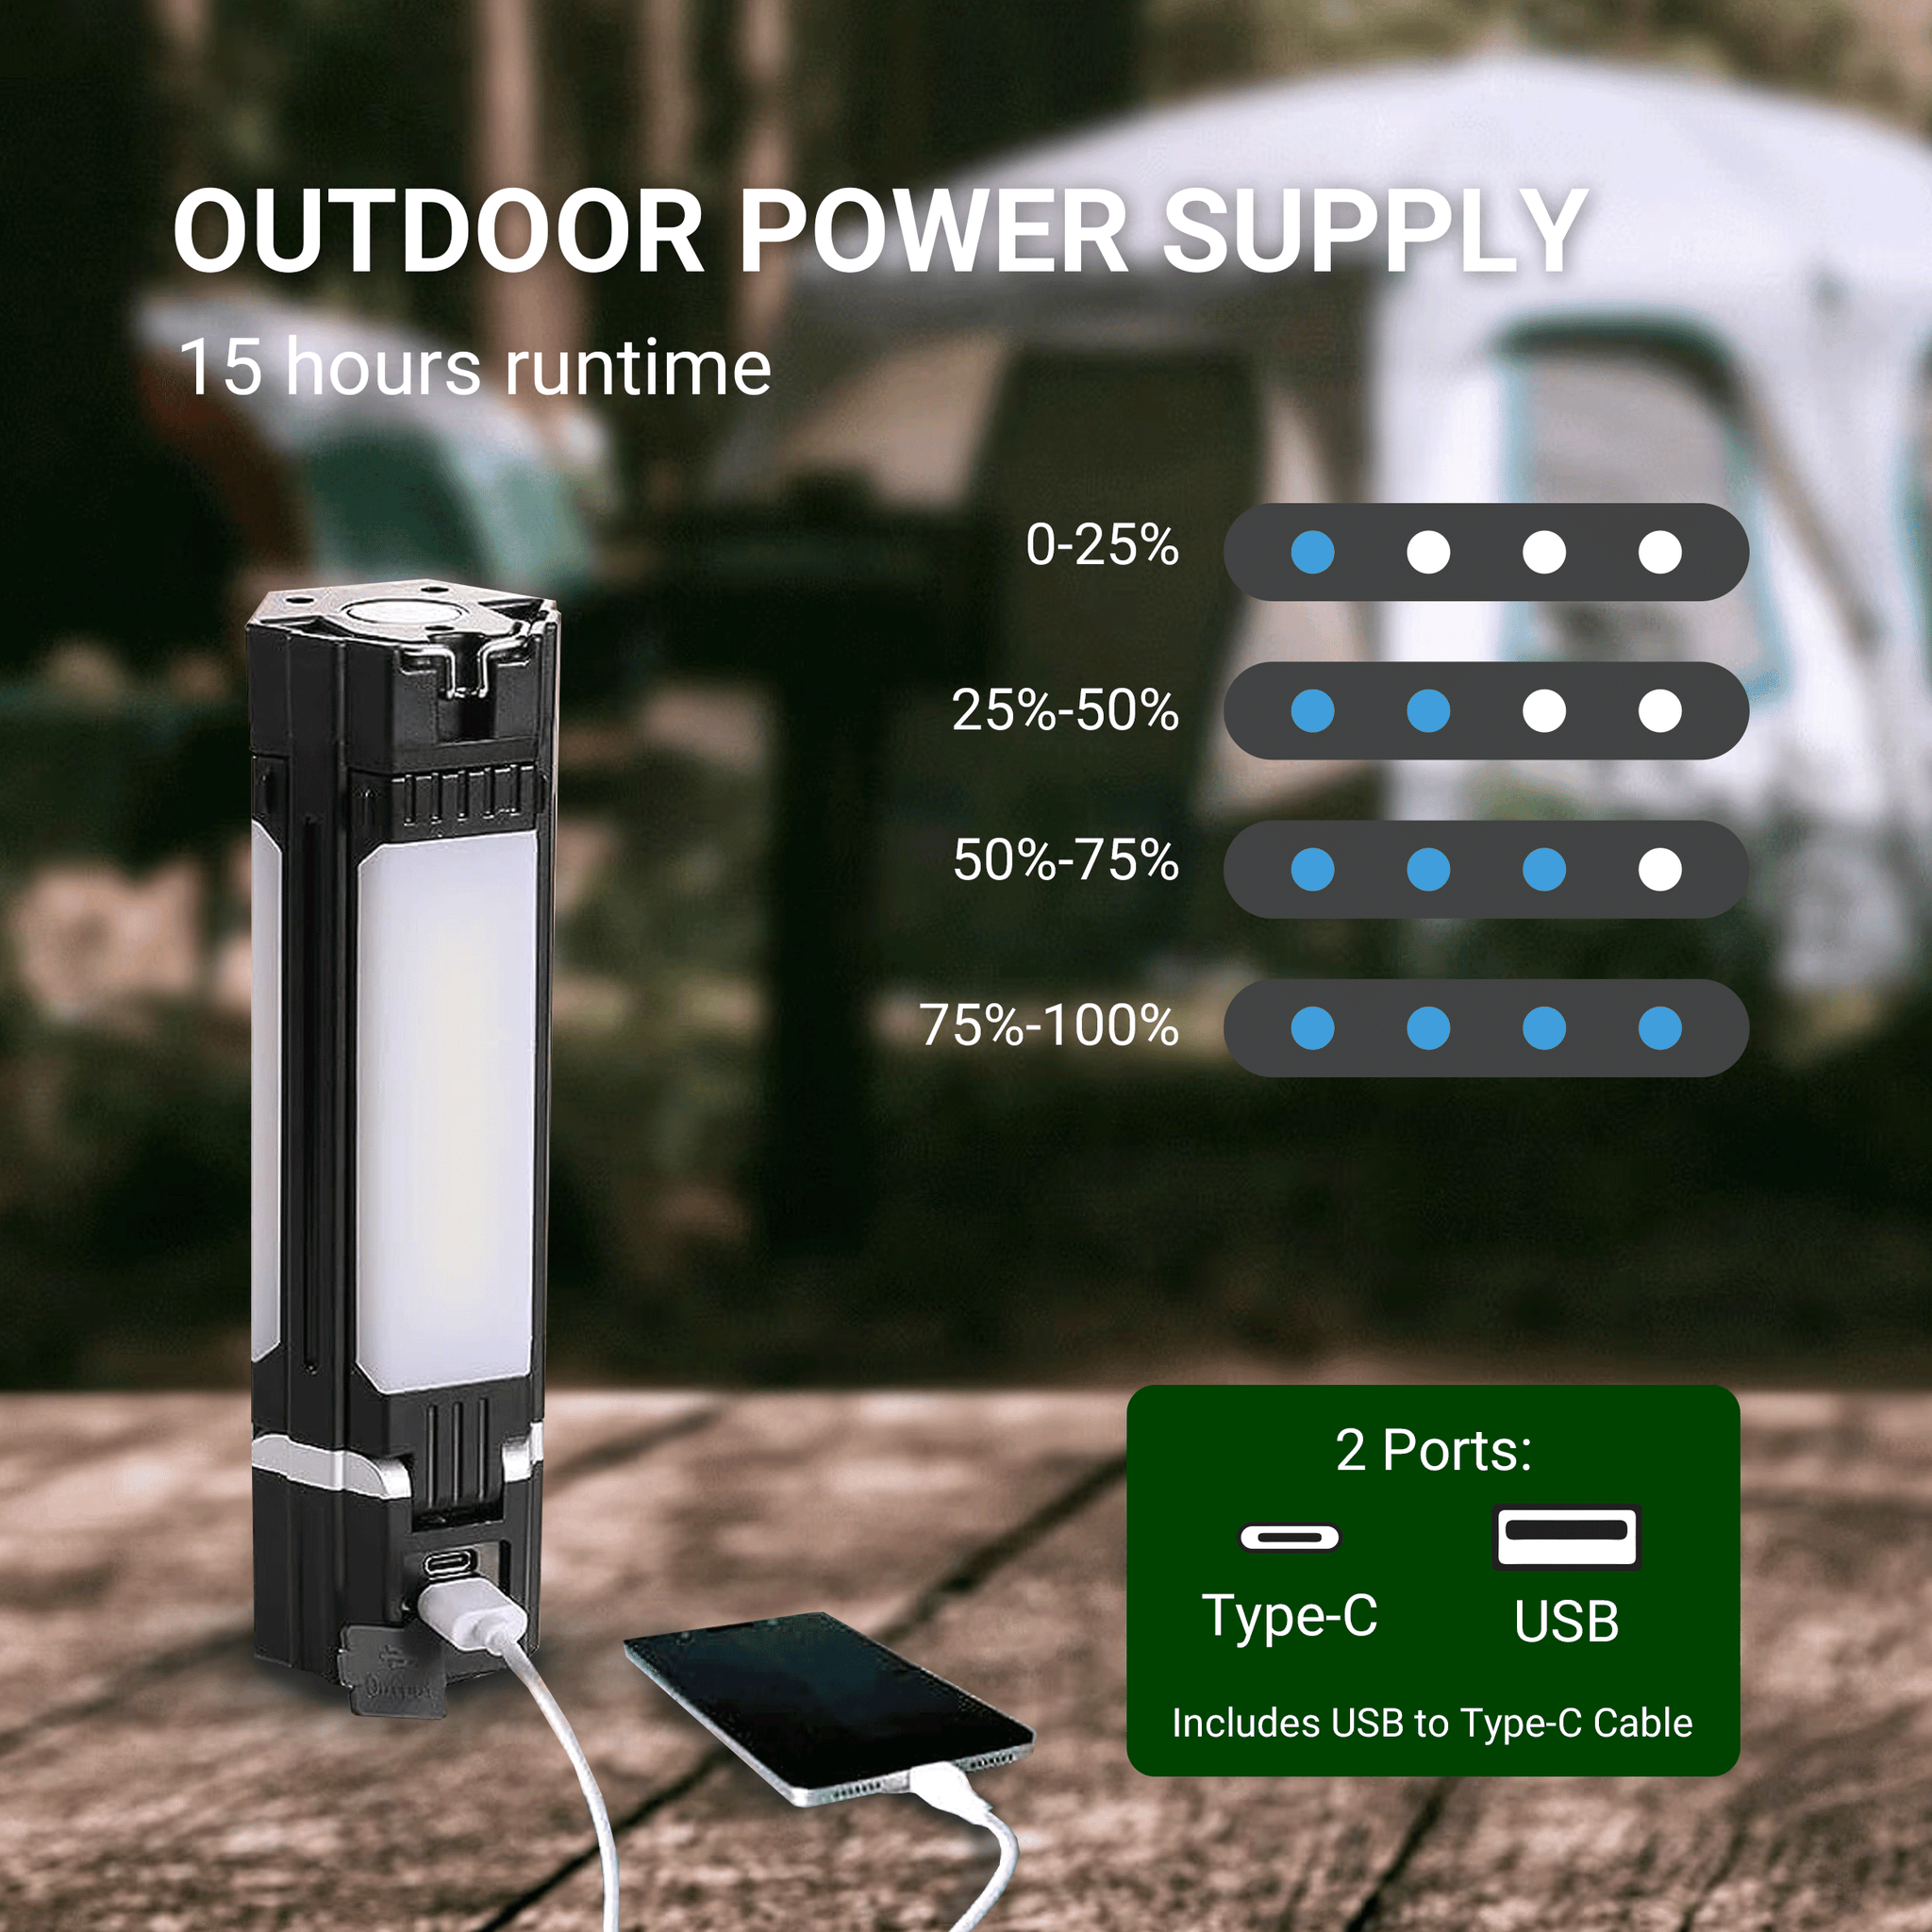 COMFORDAY Camping Lantern, Portable Tent Lamp, Collapsible LED Blade Bulb Plus Flash Light,3000mAh Rechargeable by USB Type C